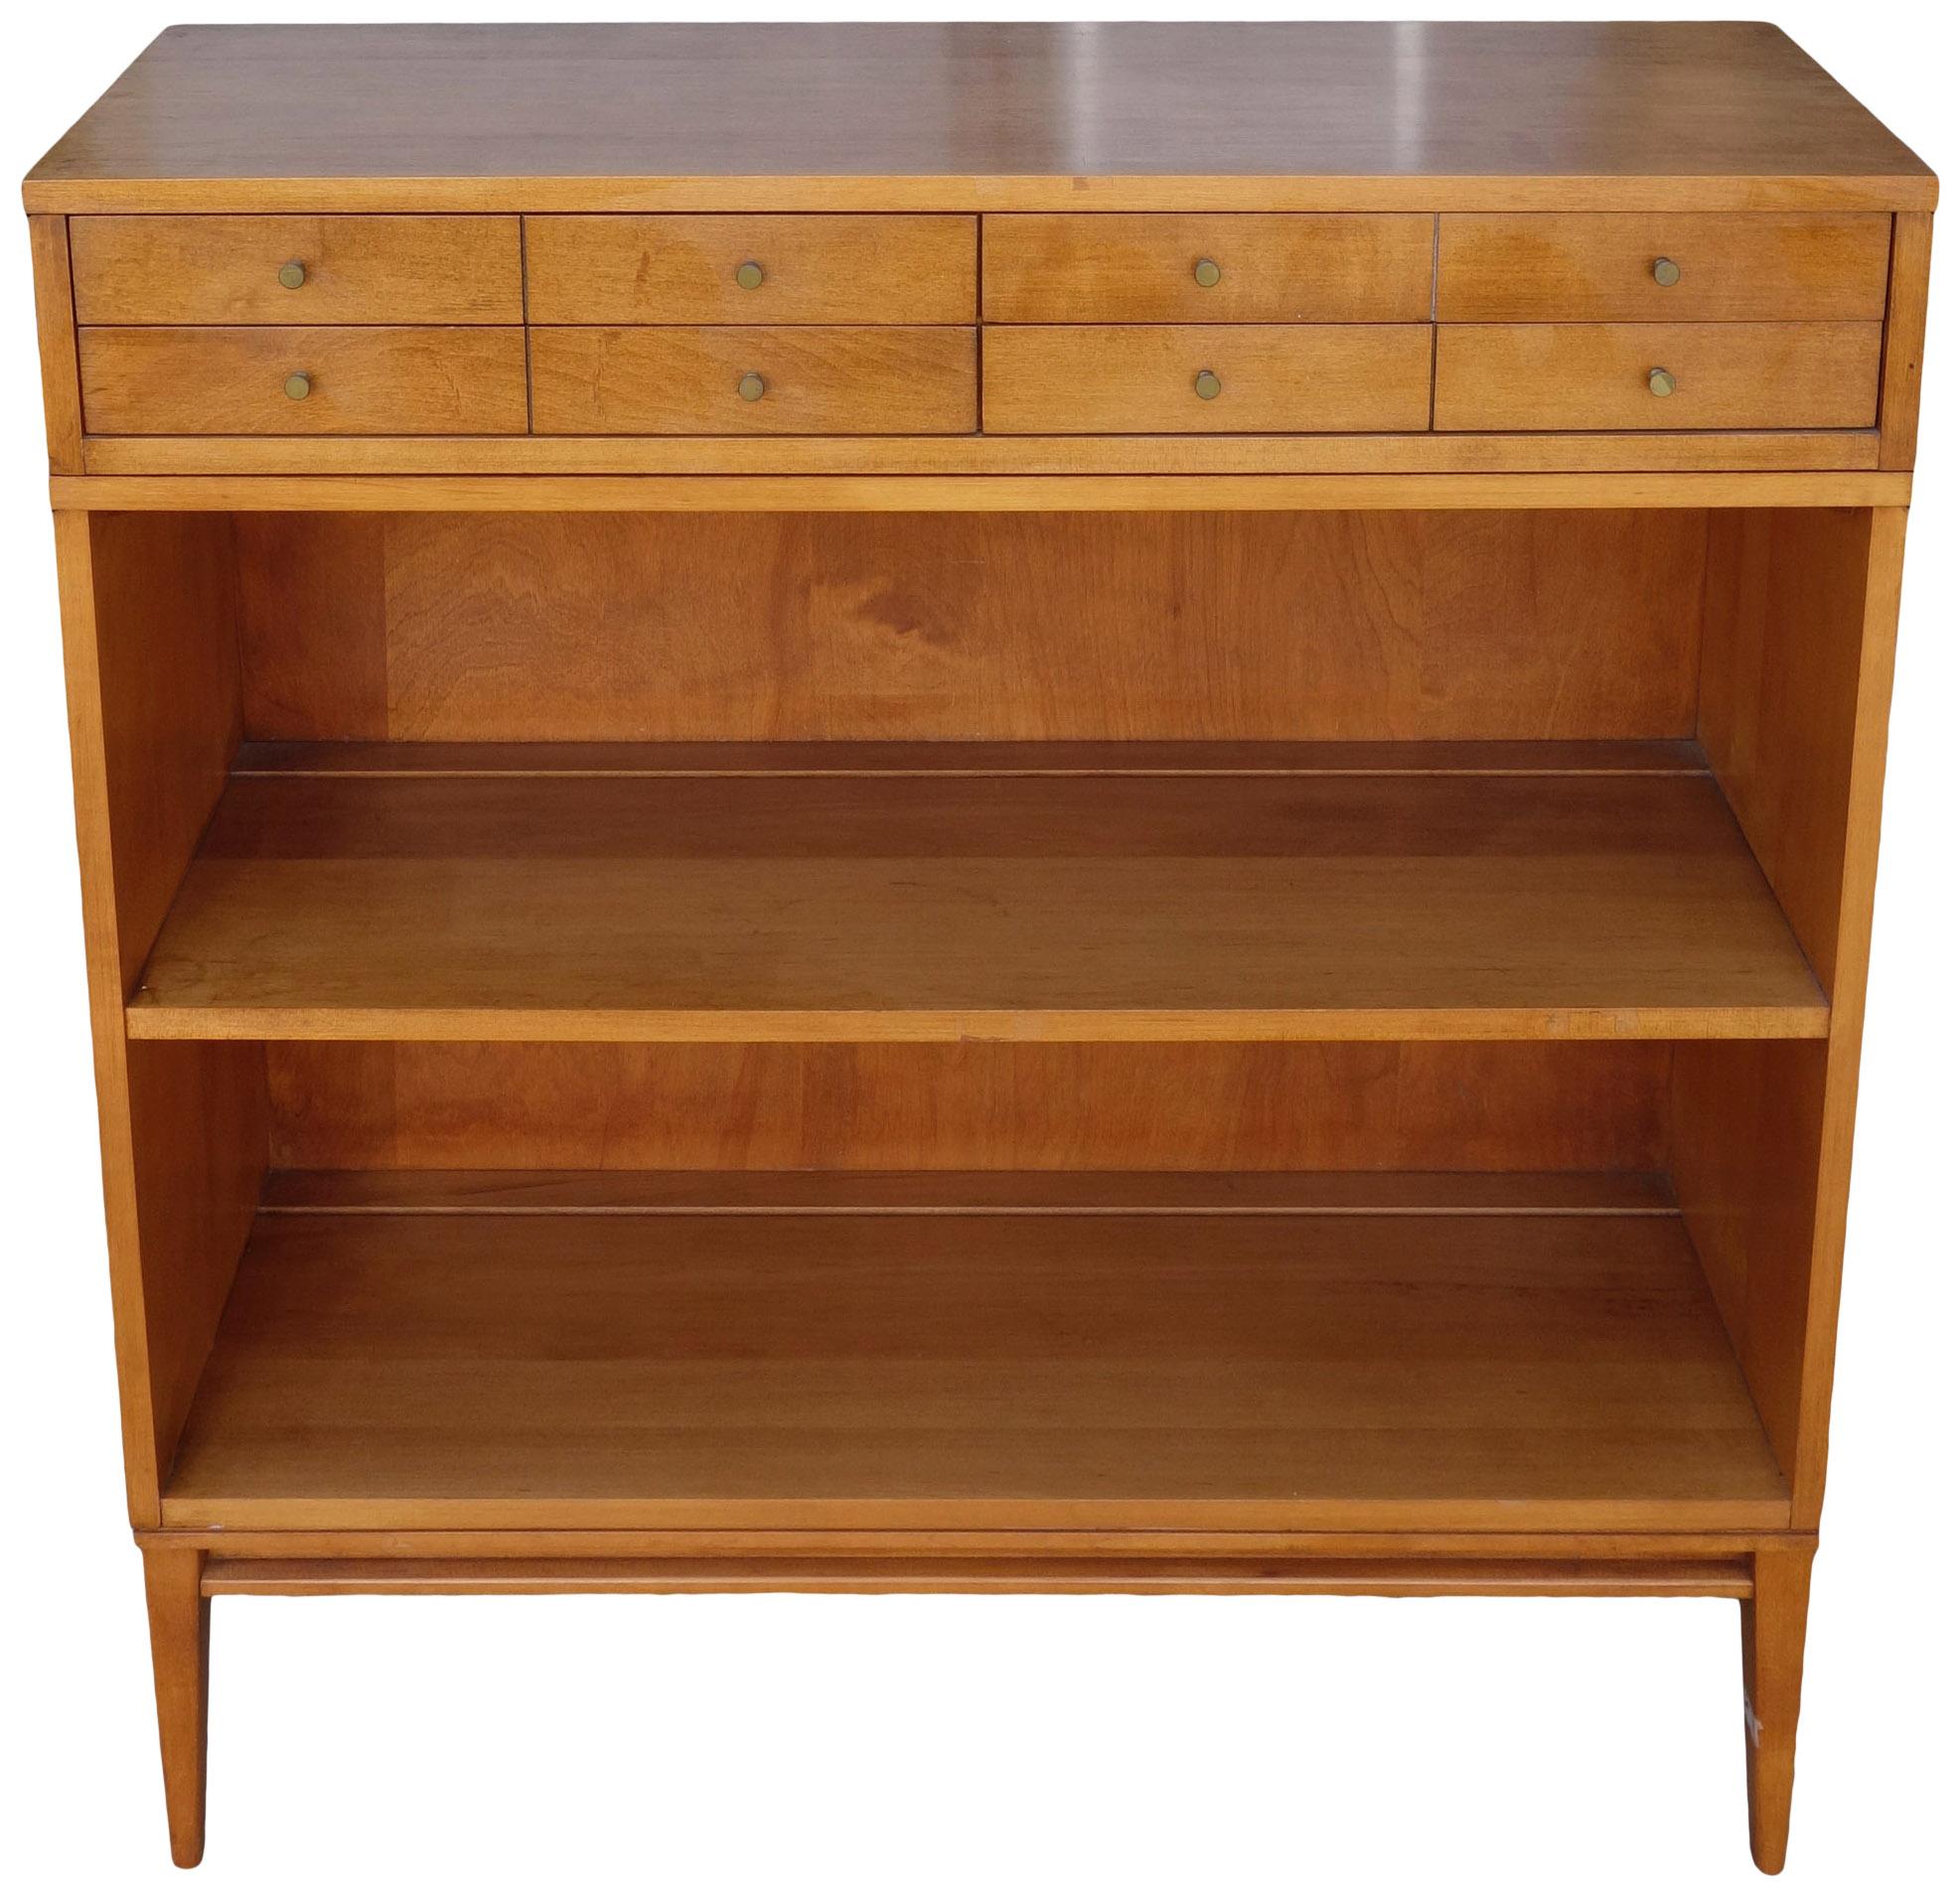 Vintage midcentury Paul McCobb single bookcase #1516 solid maple with original tobacco finish on wood base. Beautiful bookcase by Paul McCobb, circa 1950s Planner Group, single center shelf fixed position, solid maple construction. Included is the